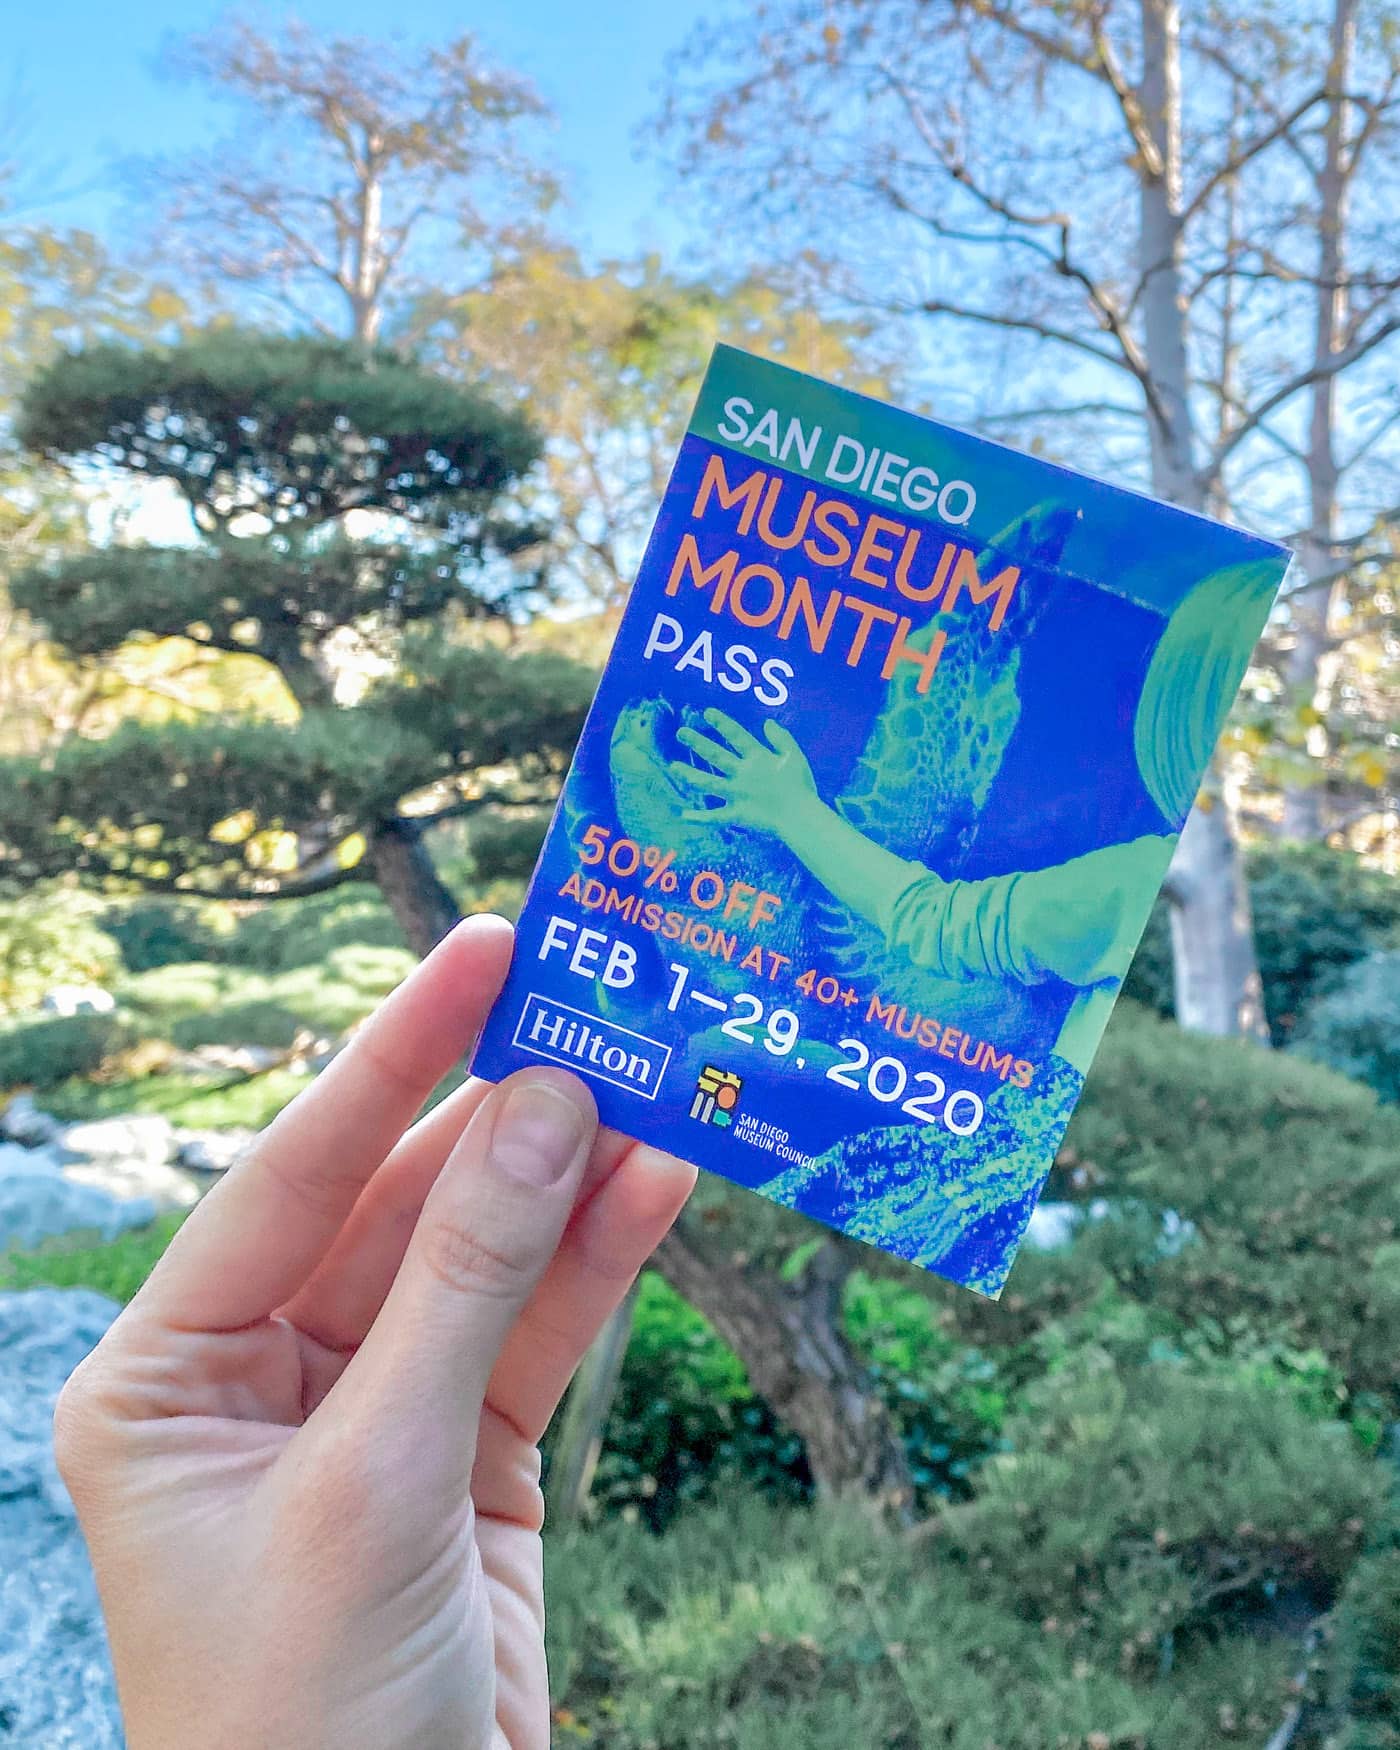 San Diego Museum Month Pass